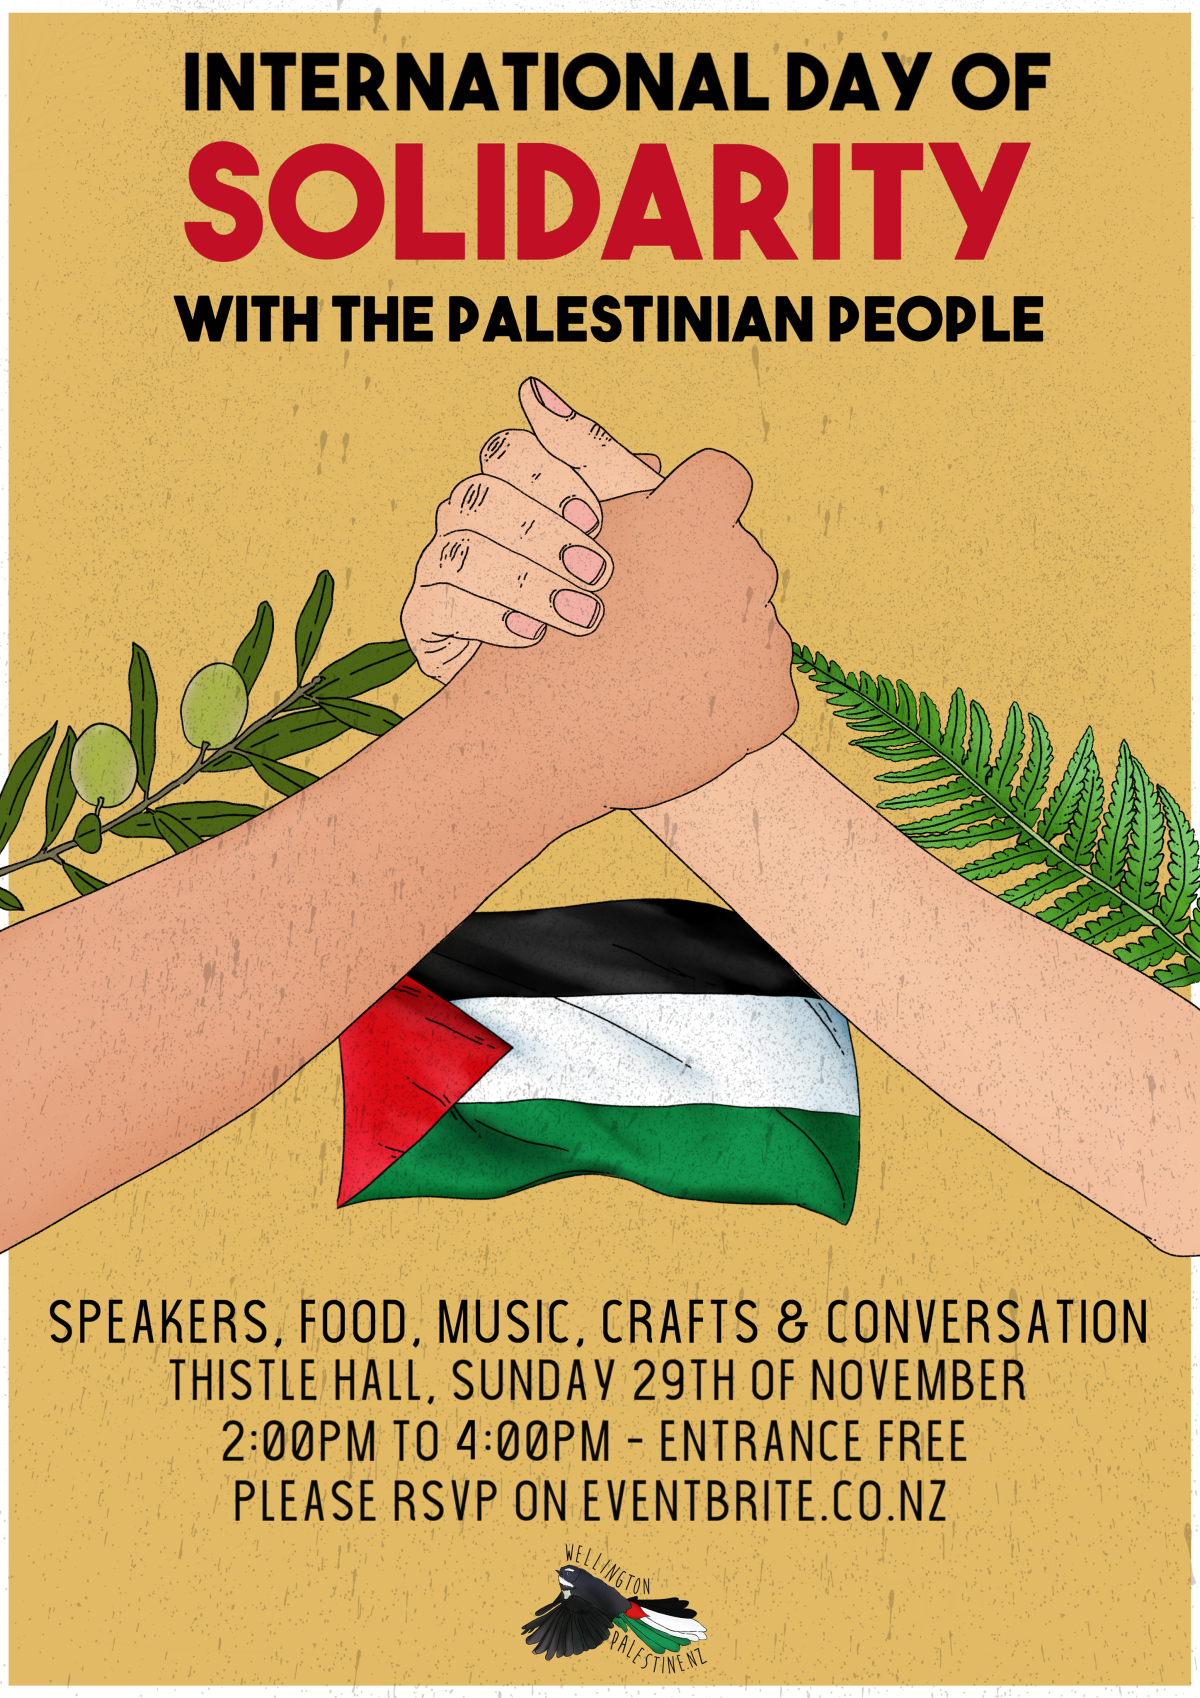 Palestinian day of solidarity poster